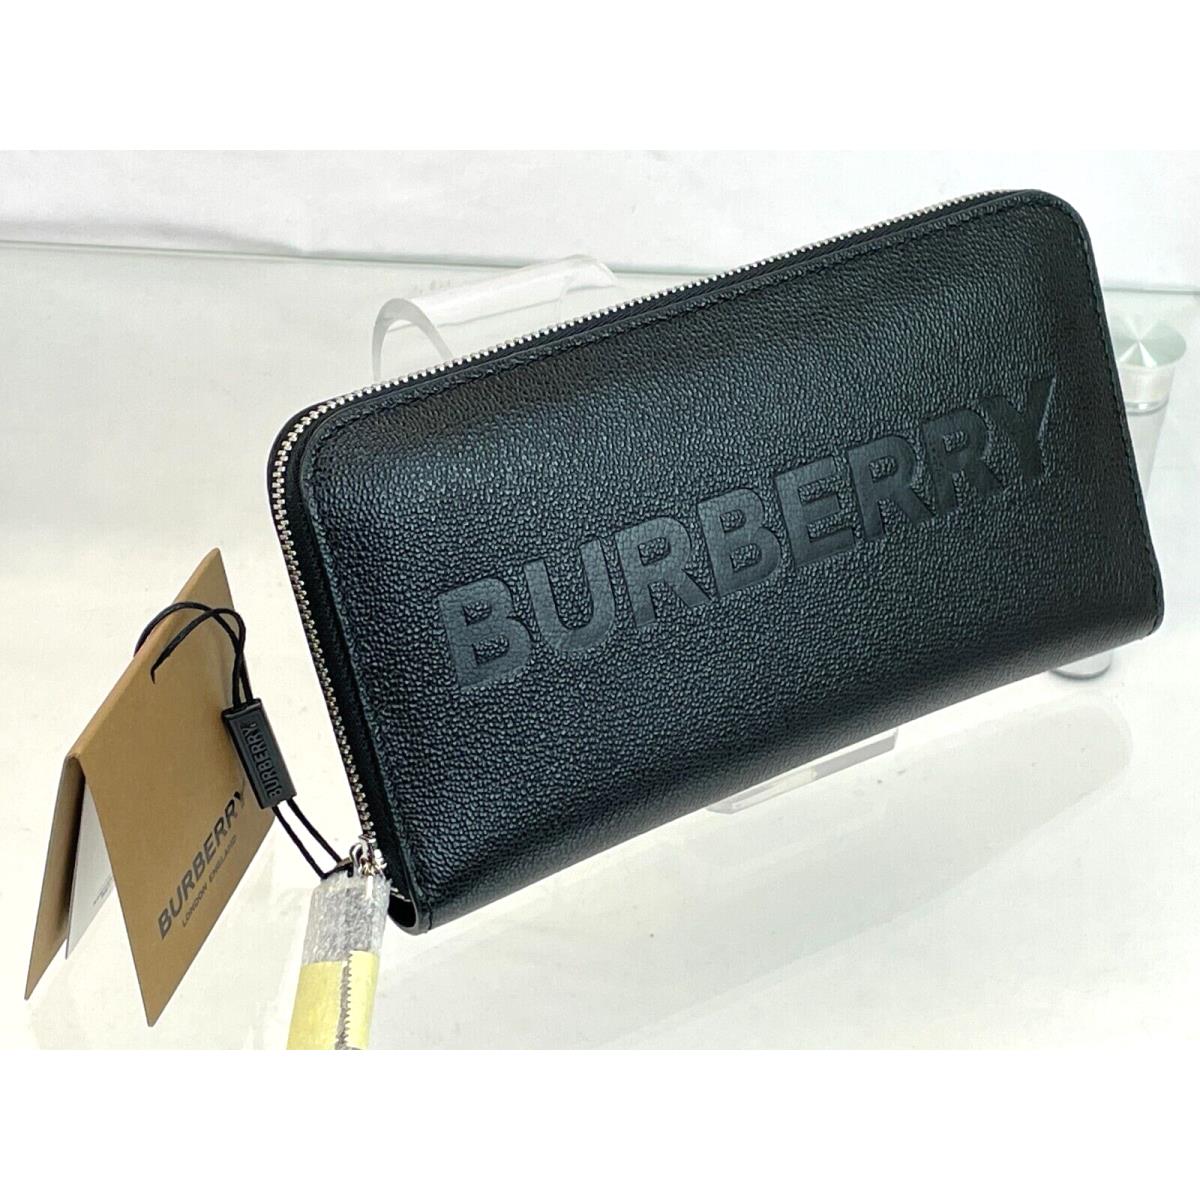 Burberry Elmore Black Logo Embossed Leather Zip Around Clutch Continental Wallet